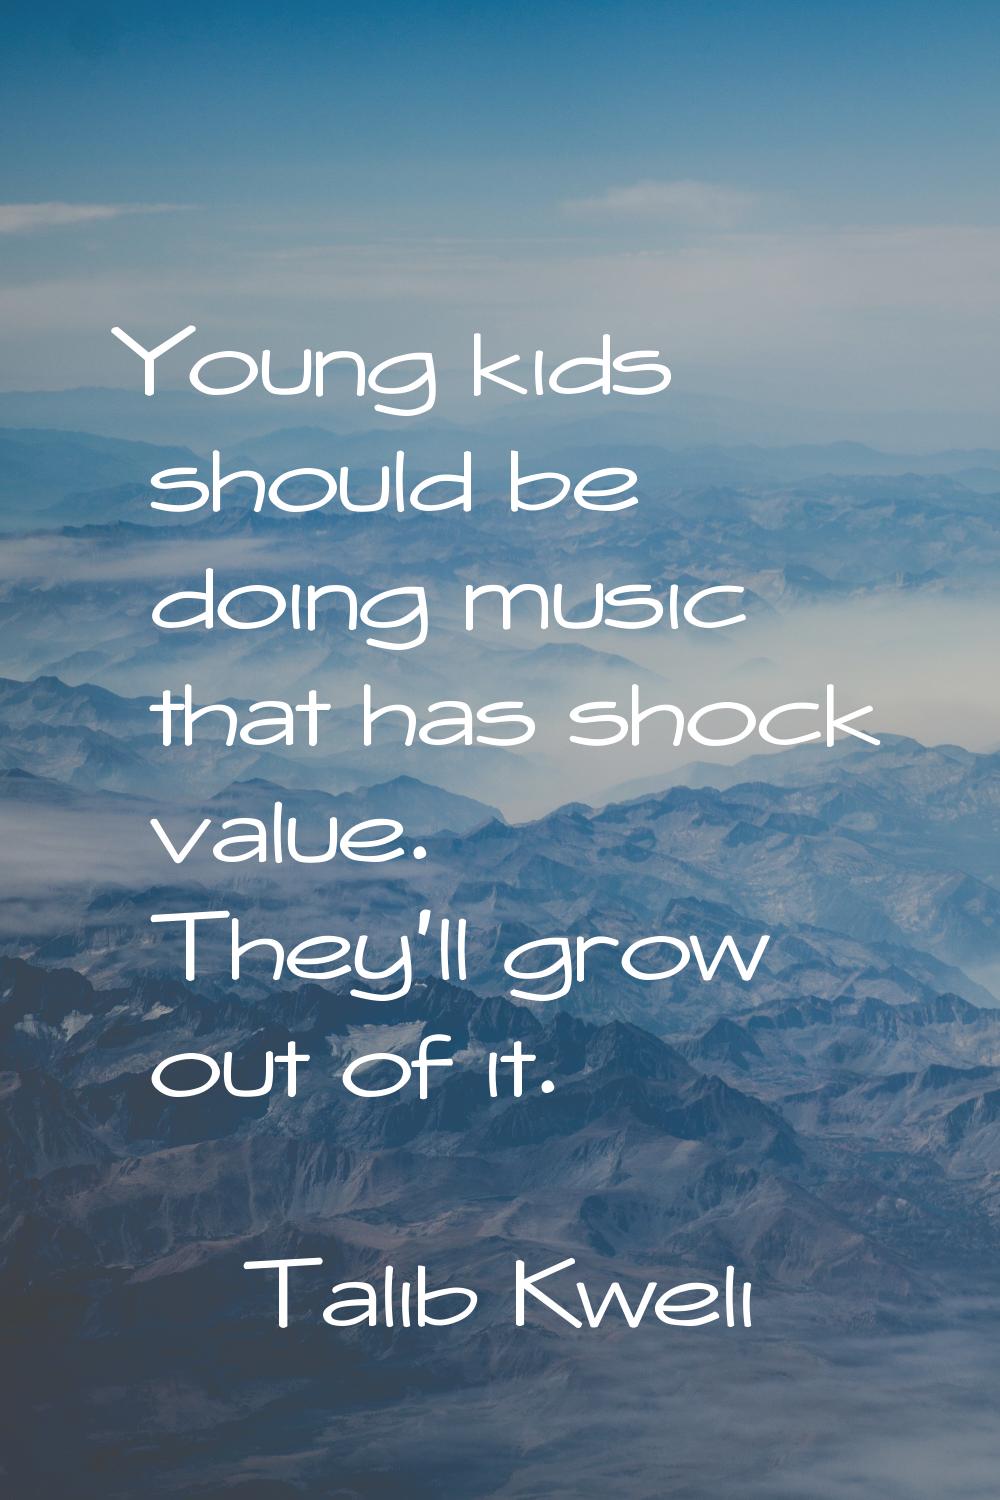 Young kids should be doing music that has shock value. They'll grow out of it.